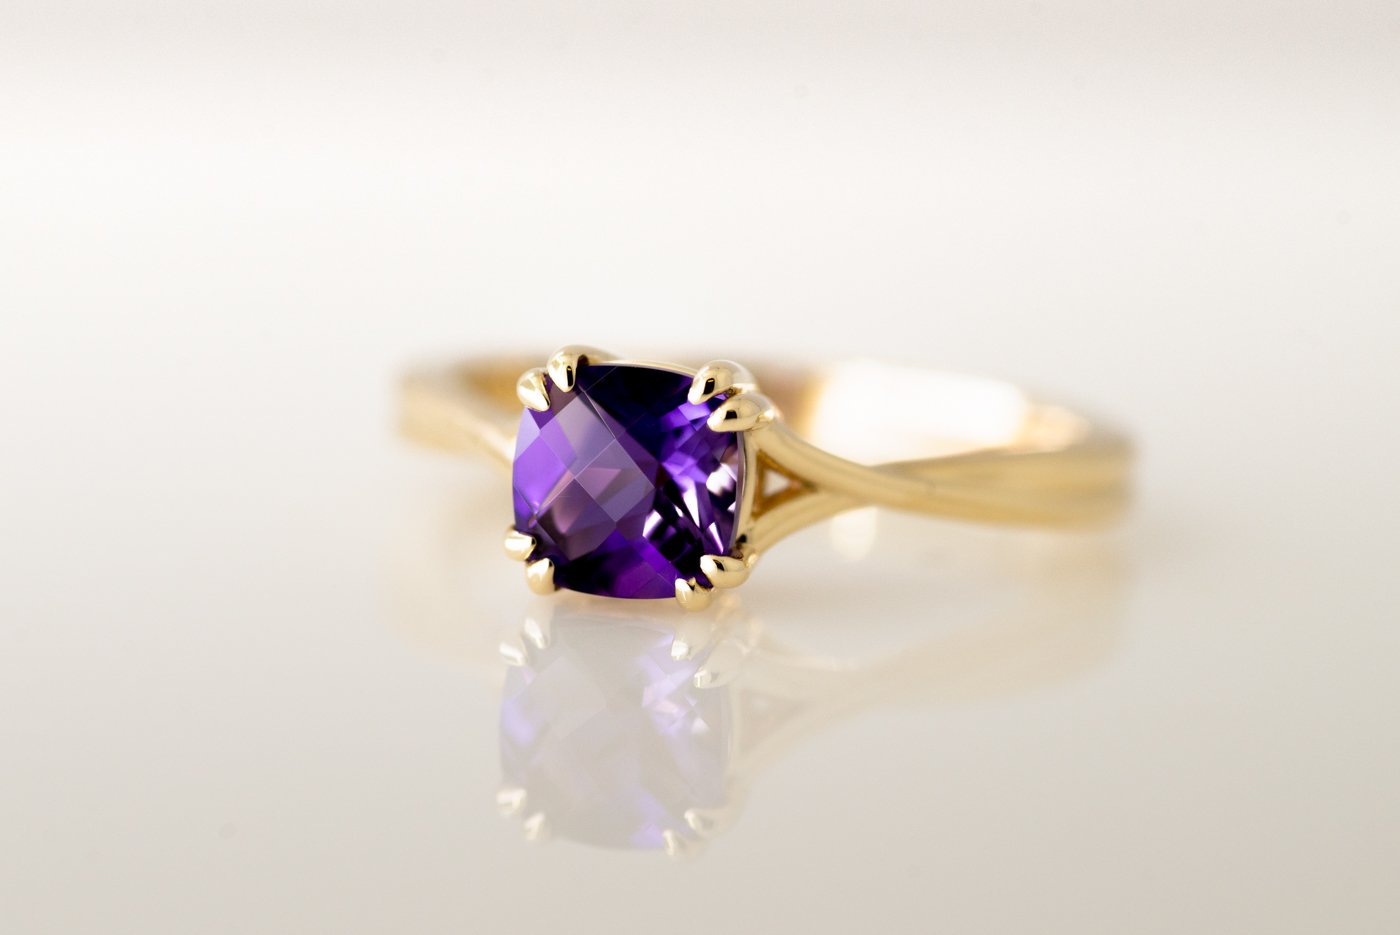 Buy 1.80ct Deep Purple Amethyst and Diamond Ring. 18K Yellow Gold Floral  Motif Ring. Online in India - Etsy